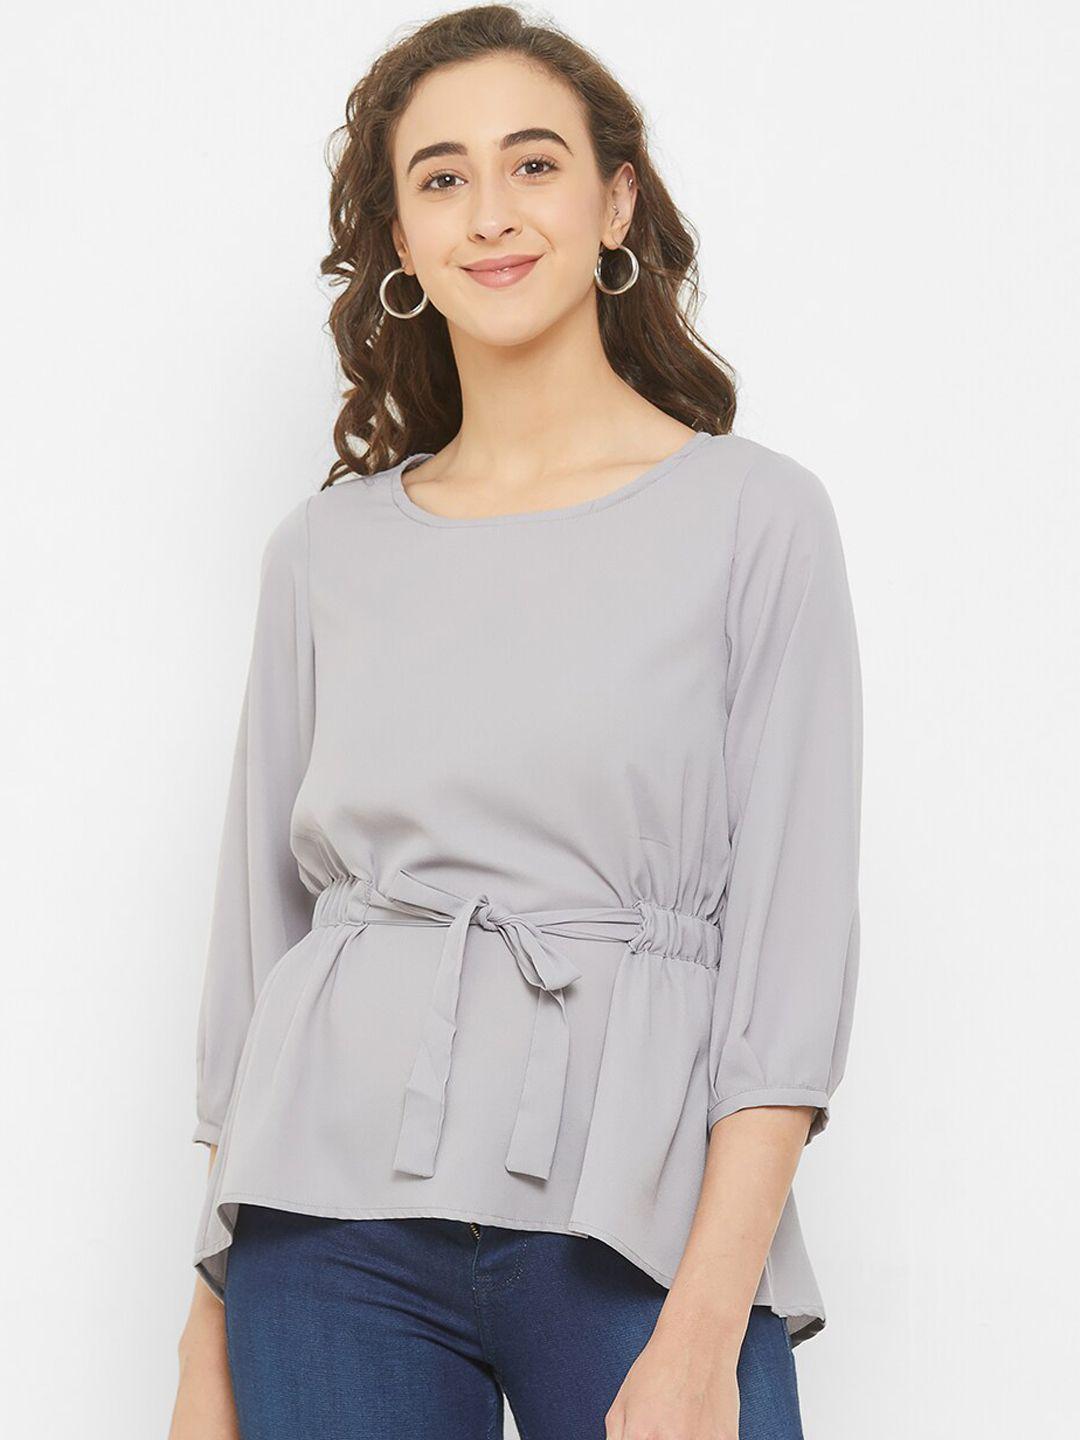 109f women grey solid a-line top